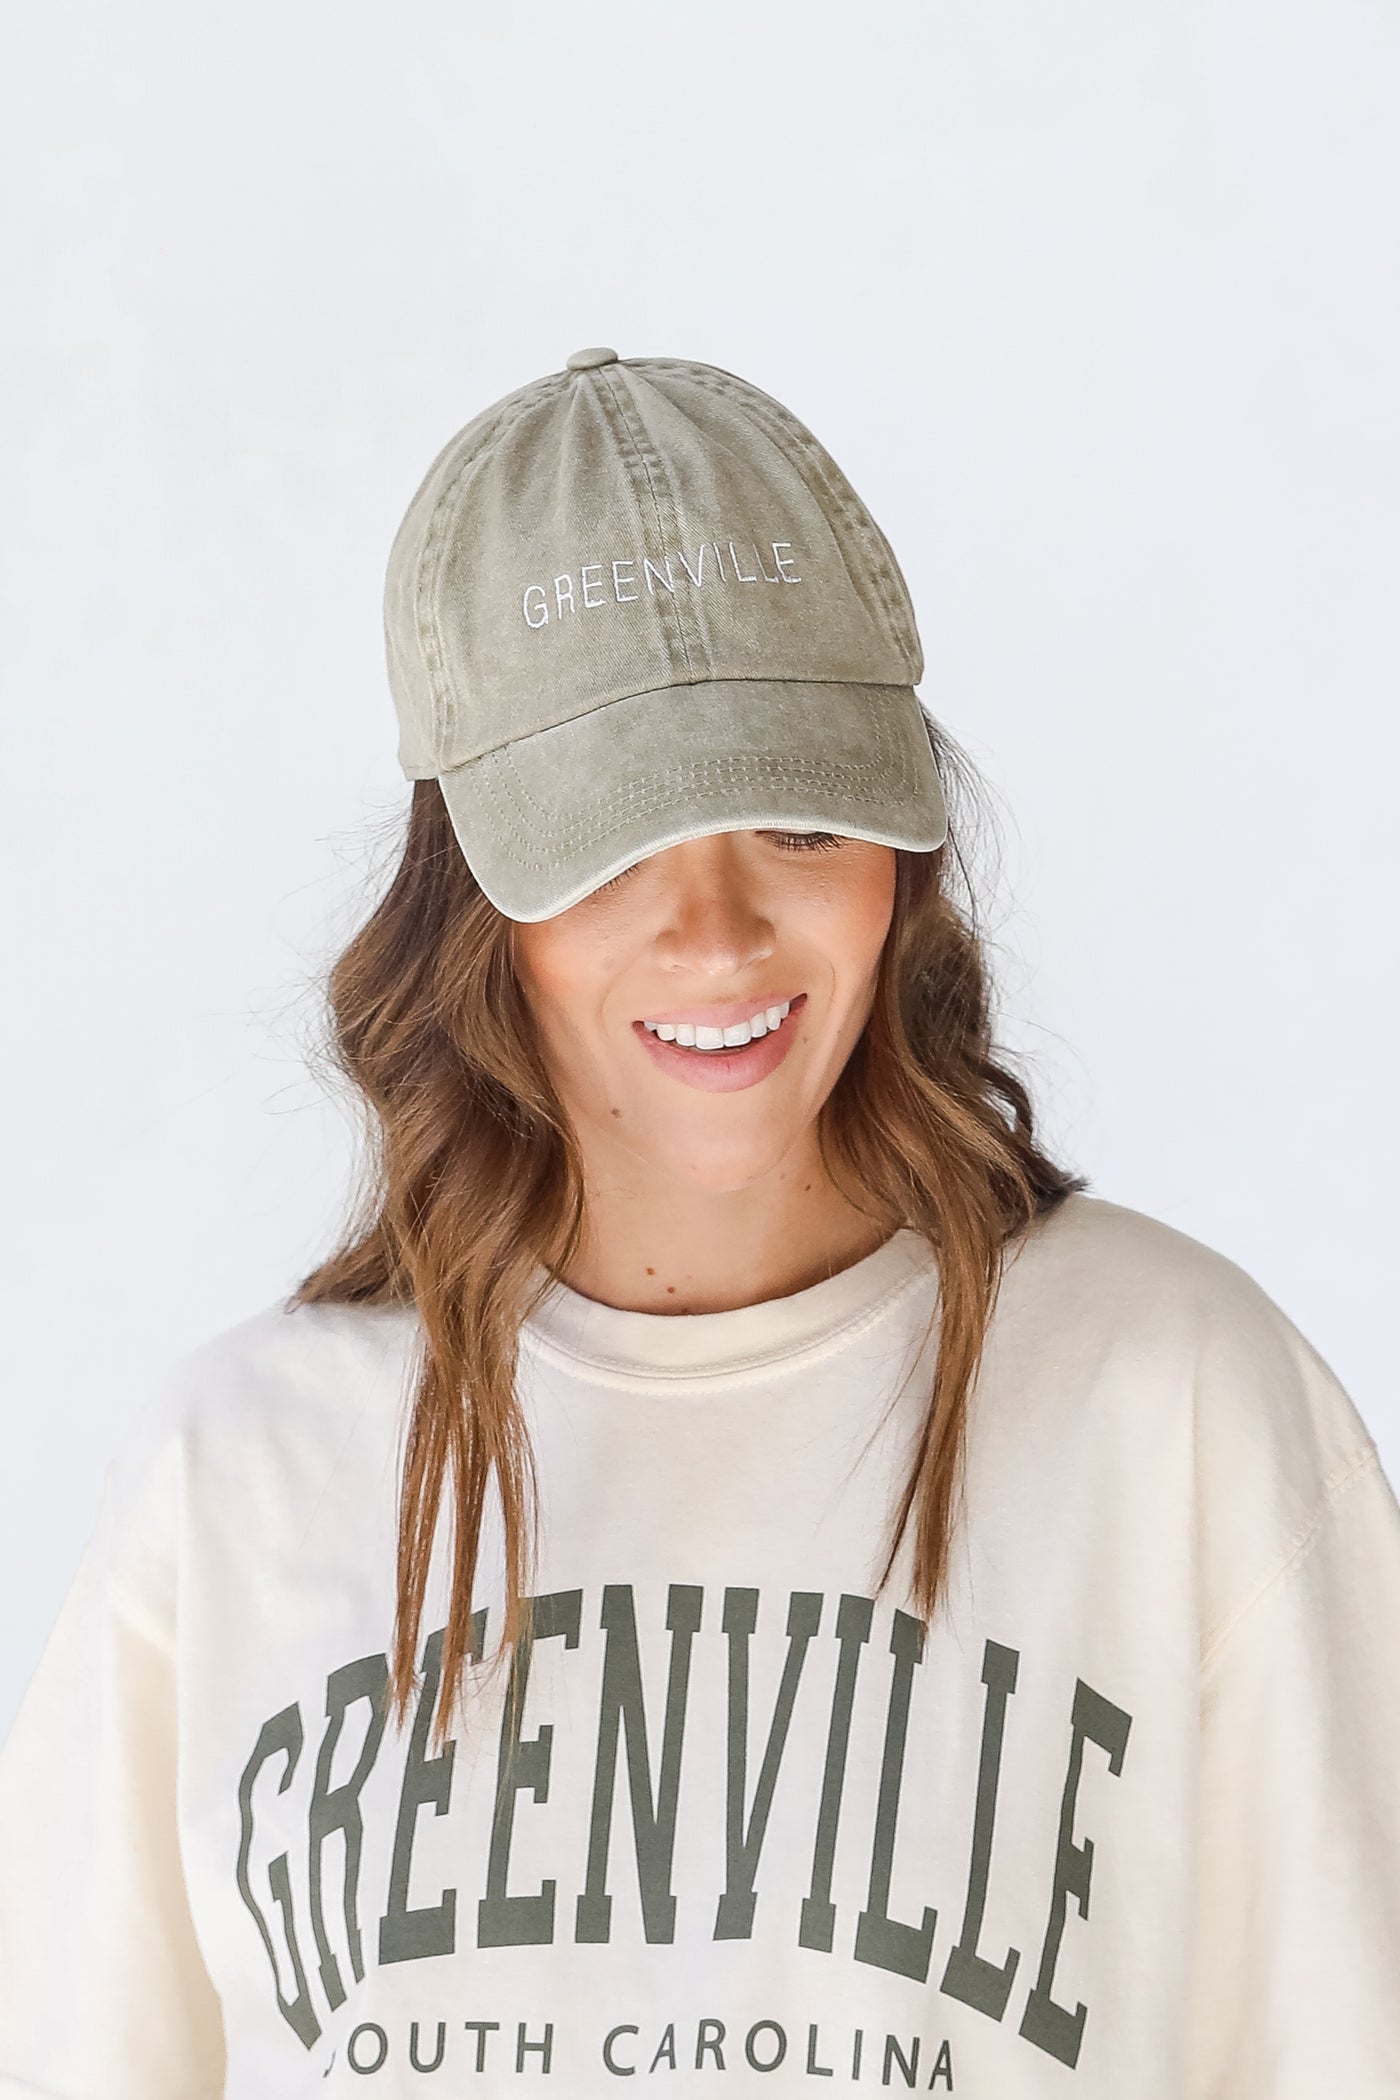 Greenville Embroidered Hat in khaki